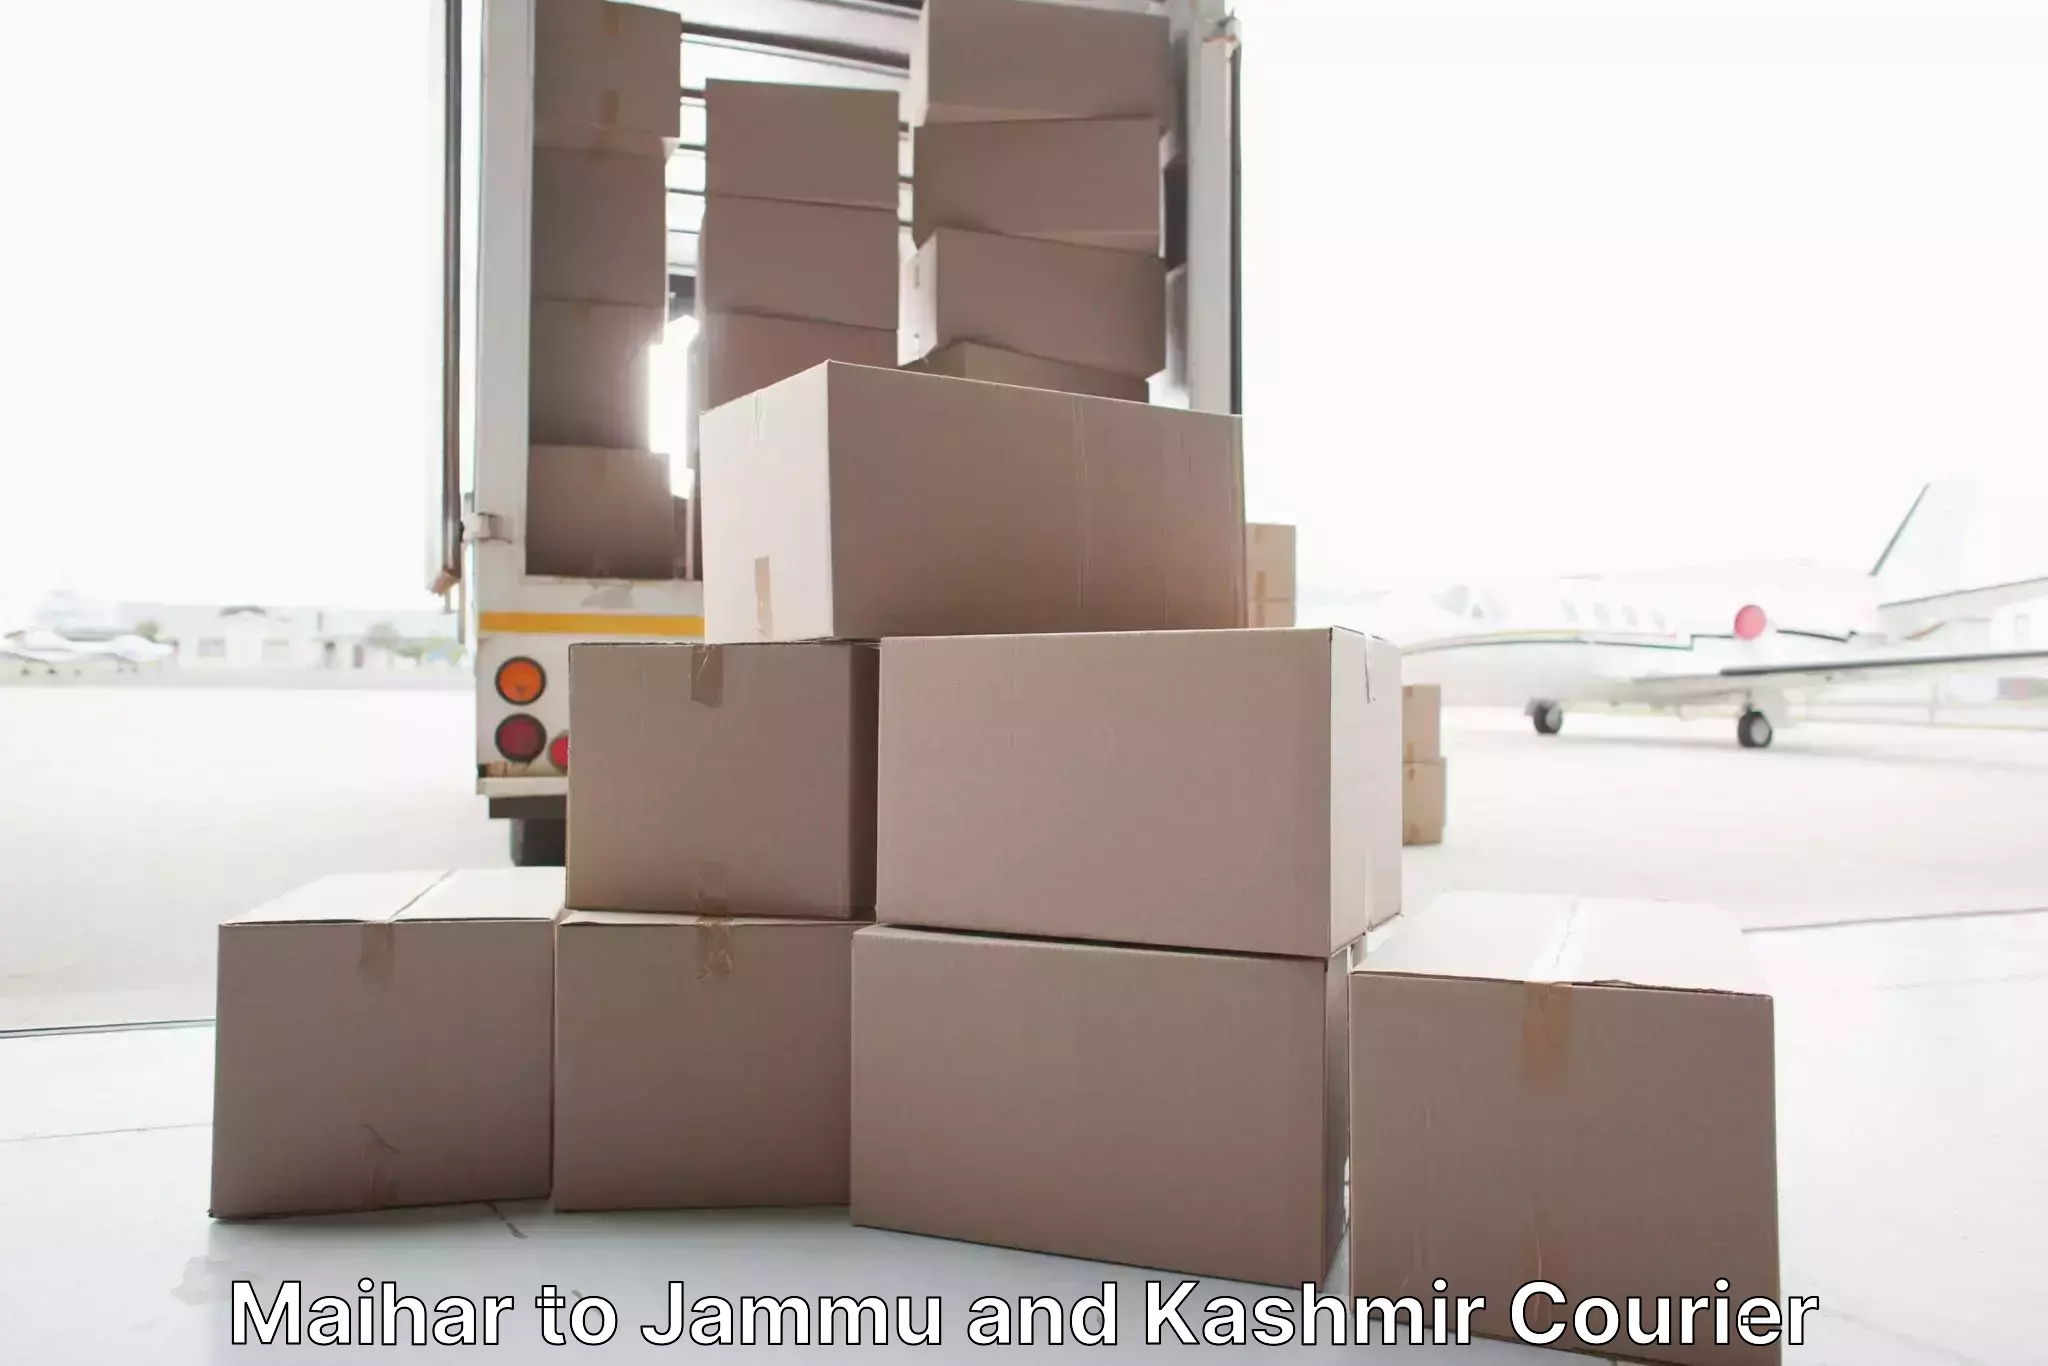 Full-service movers in Maihar to Jammu and Kashmir